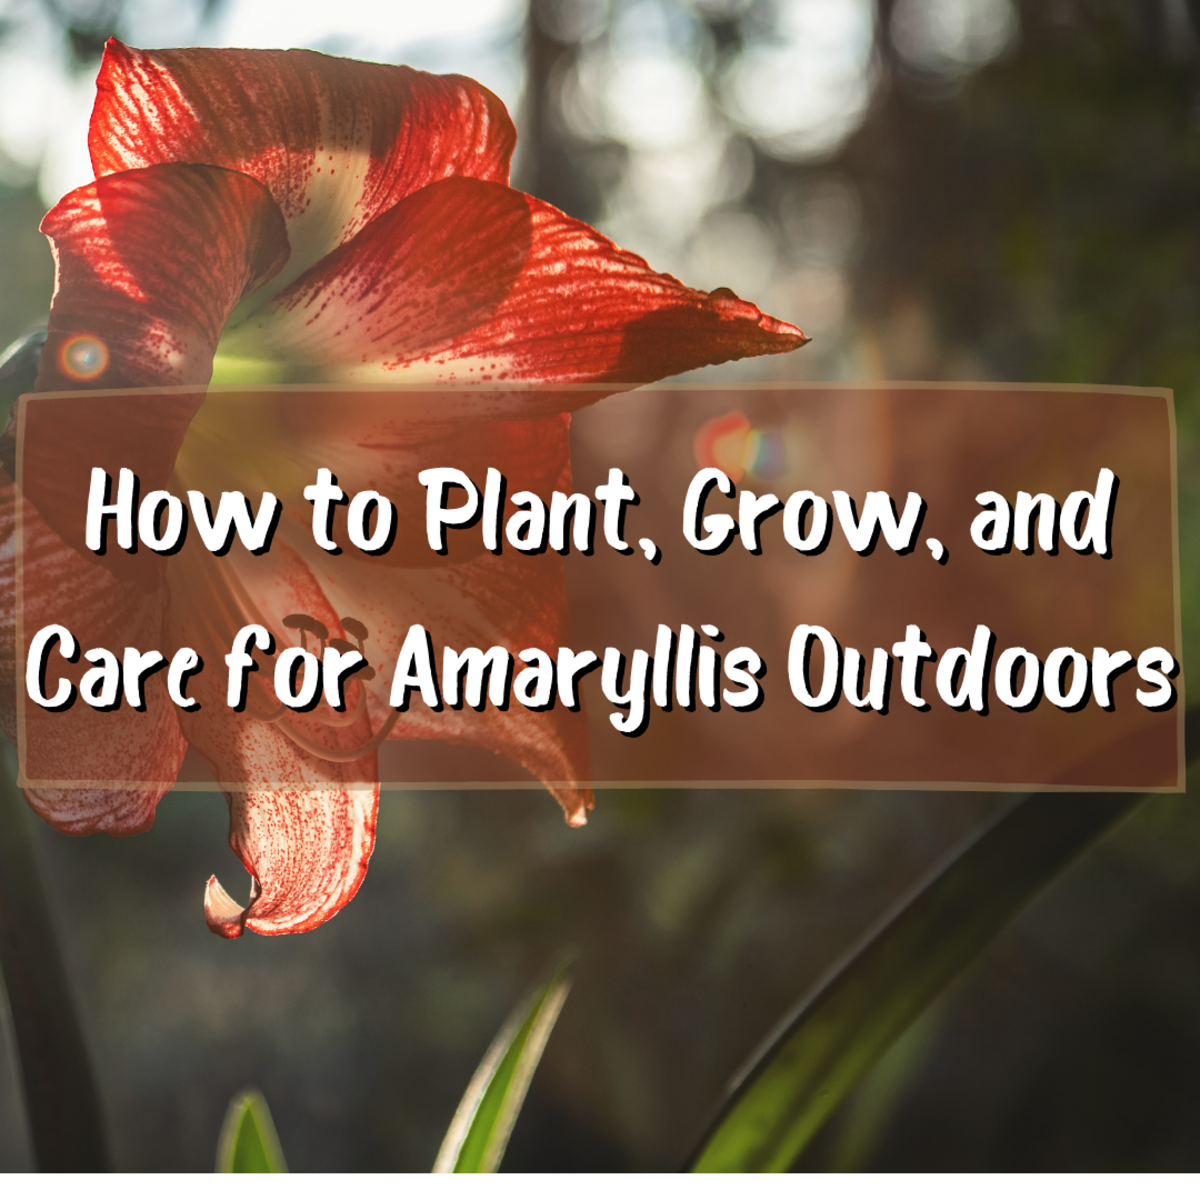 Amaryllis care outdoors is made easy with this guide on how to plant, grow, and care for them. Planting amaryllis outside will be a breeze after reading this article!